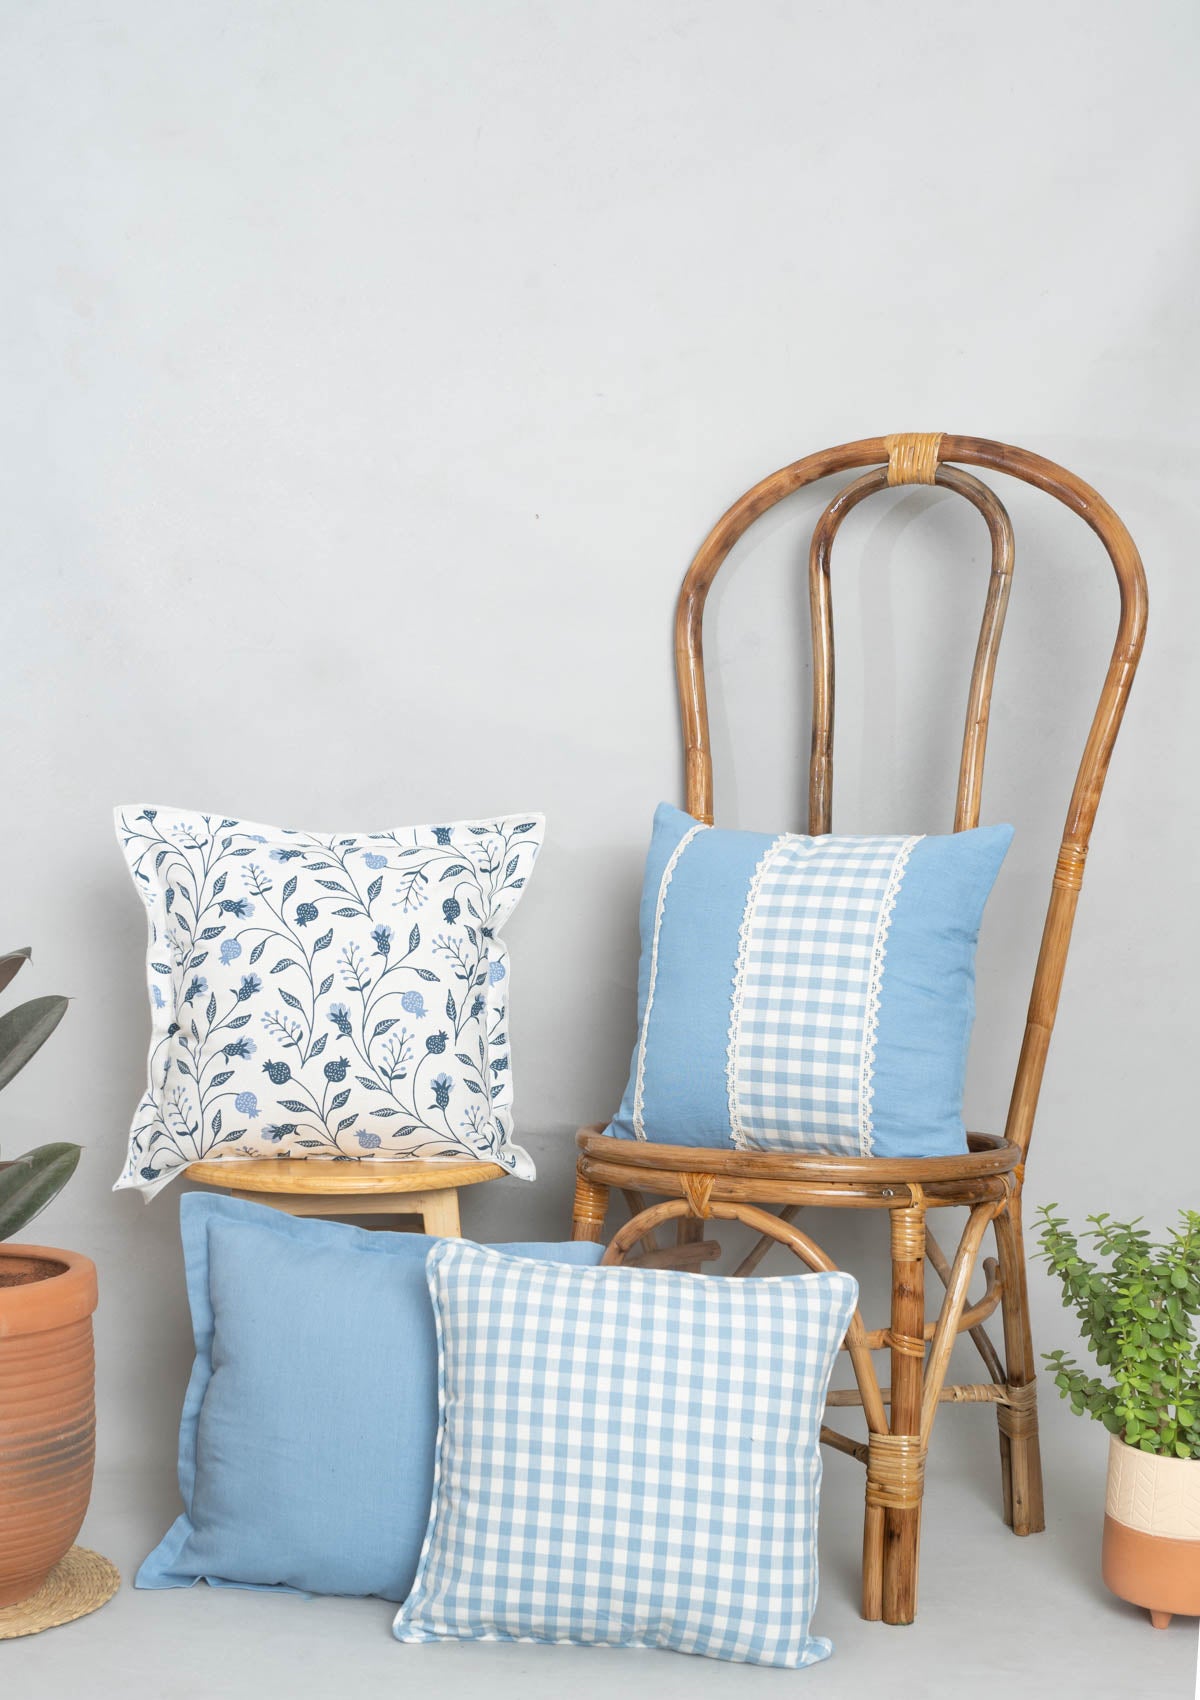 Heirloom Combo Set Of 4 Cotton Cushion Cover - Blue